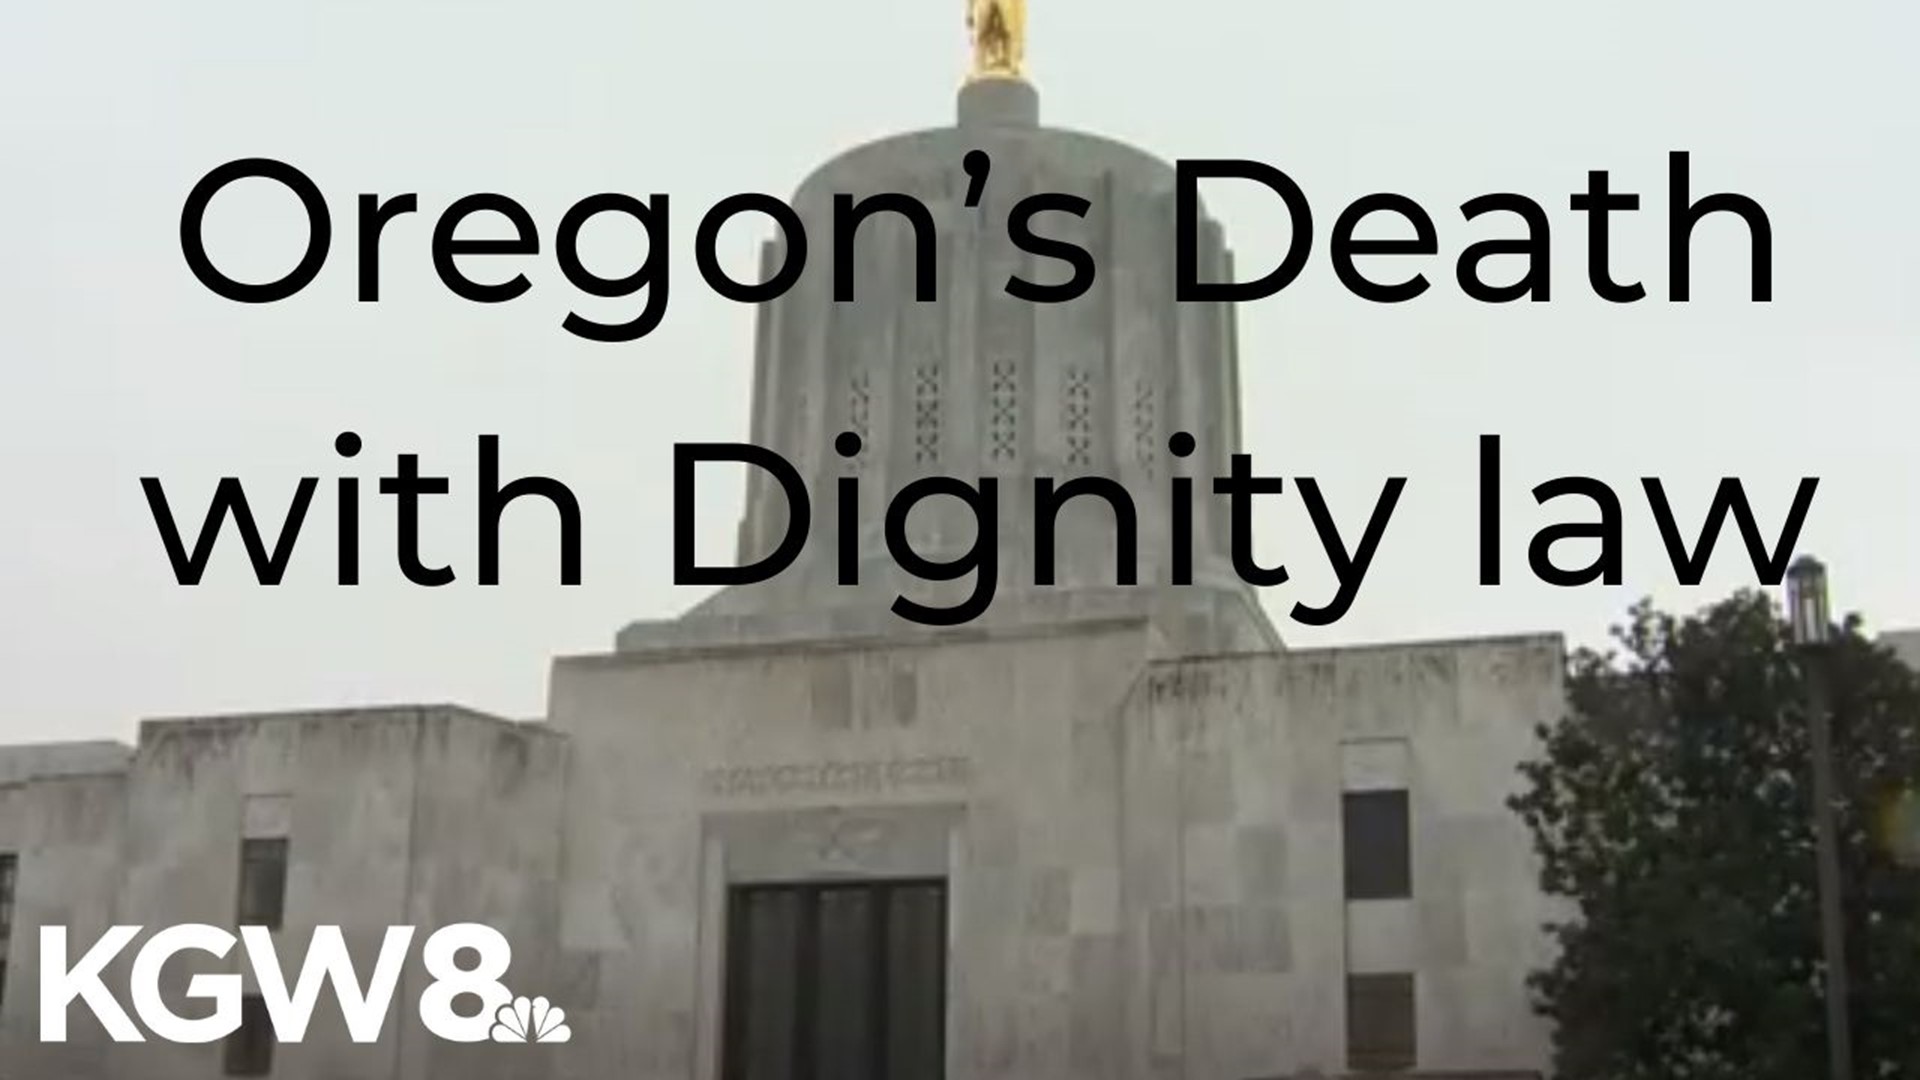 Oregon’s Death with Dignity law has been around for more than a quarter of a century. So how did we get here?